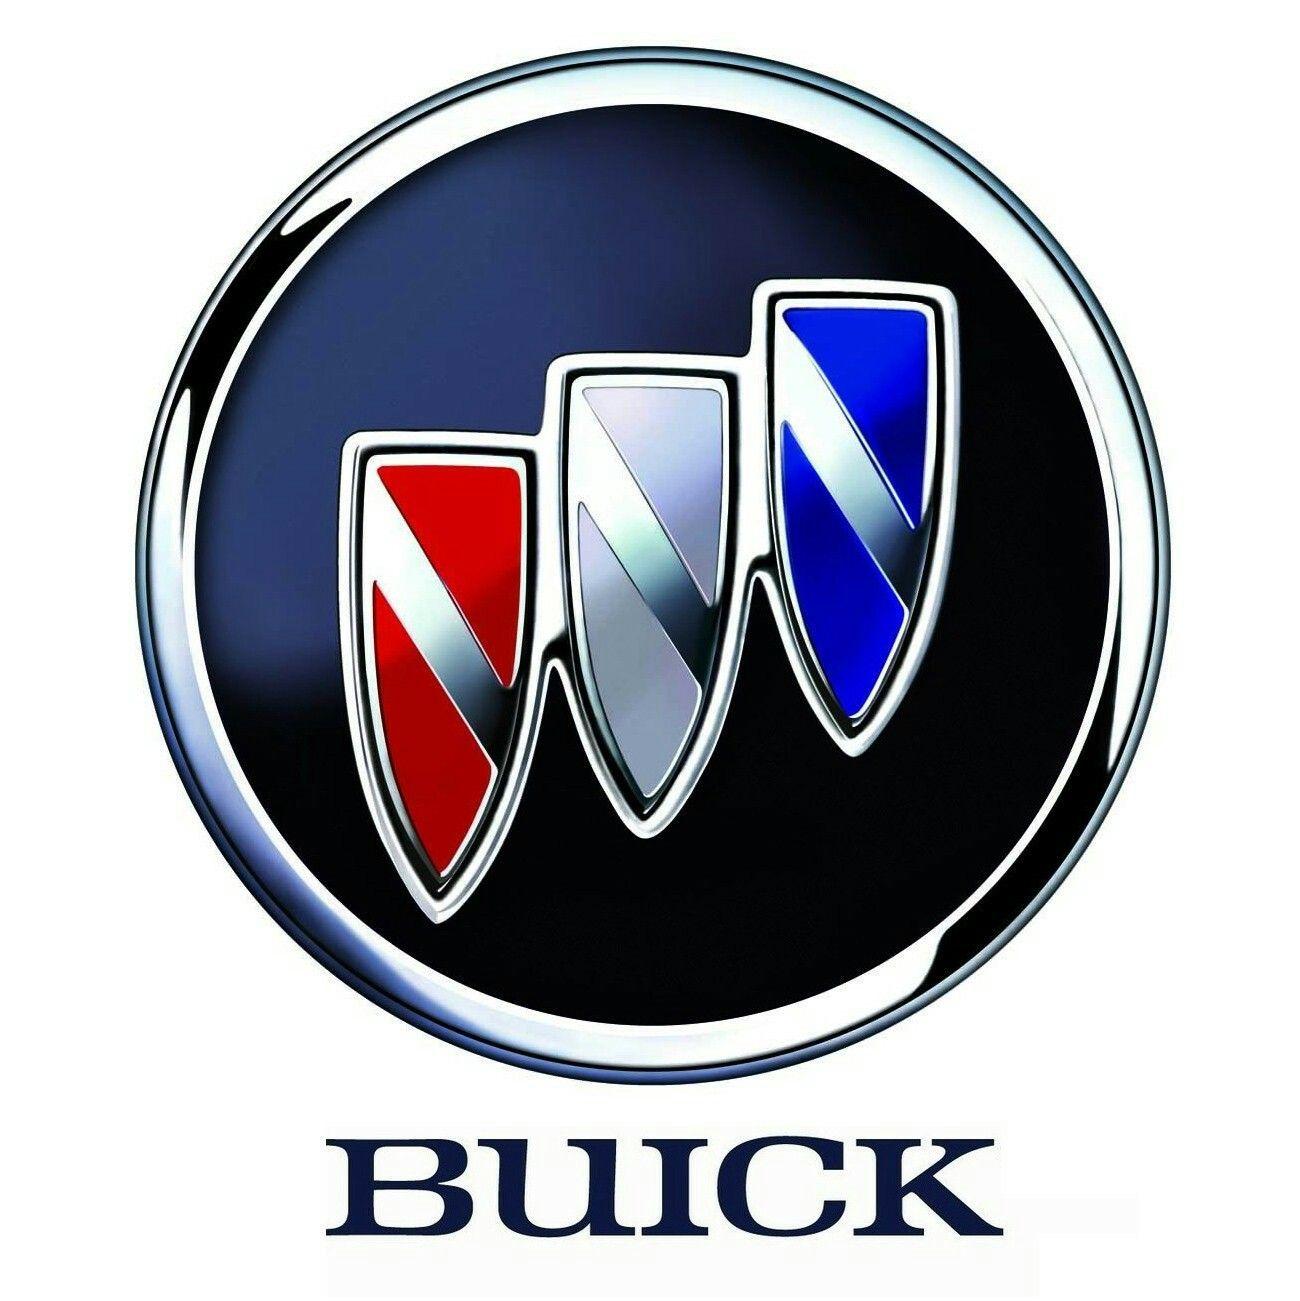 Buick Division Logo - Buick Logo, Buick Car Symbol Meaning and History | Car Brand ...